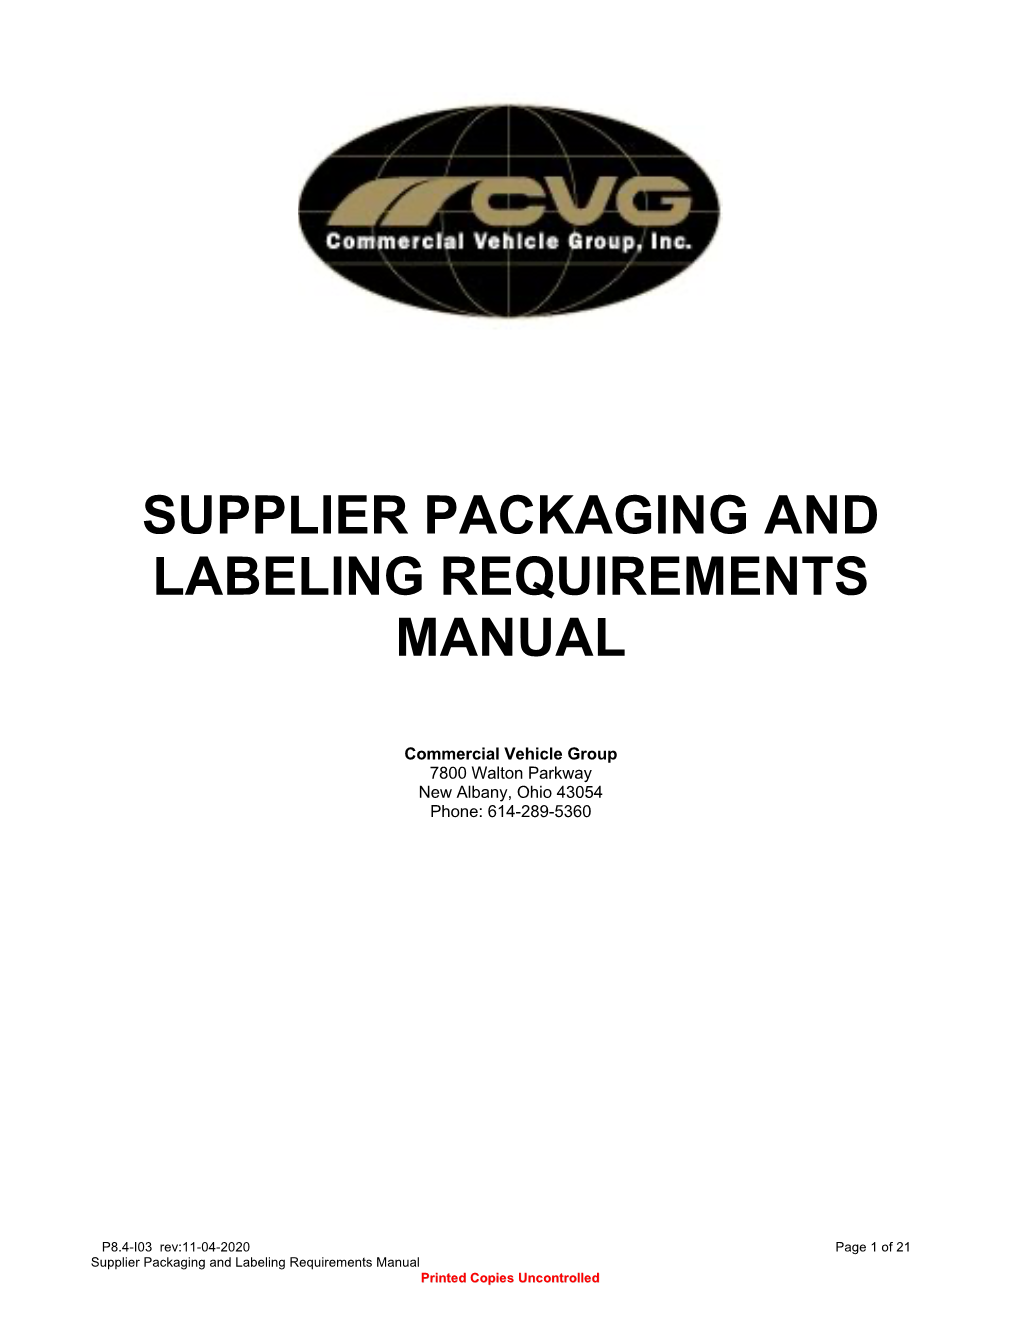 Supplier Packaging and Labeling Requirements Manual